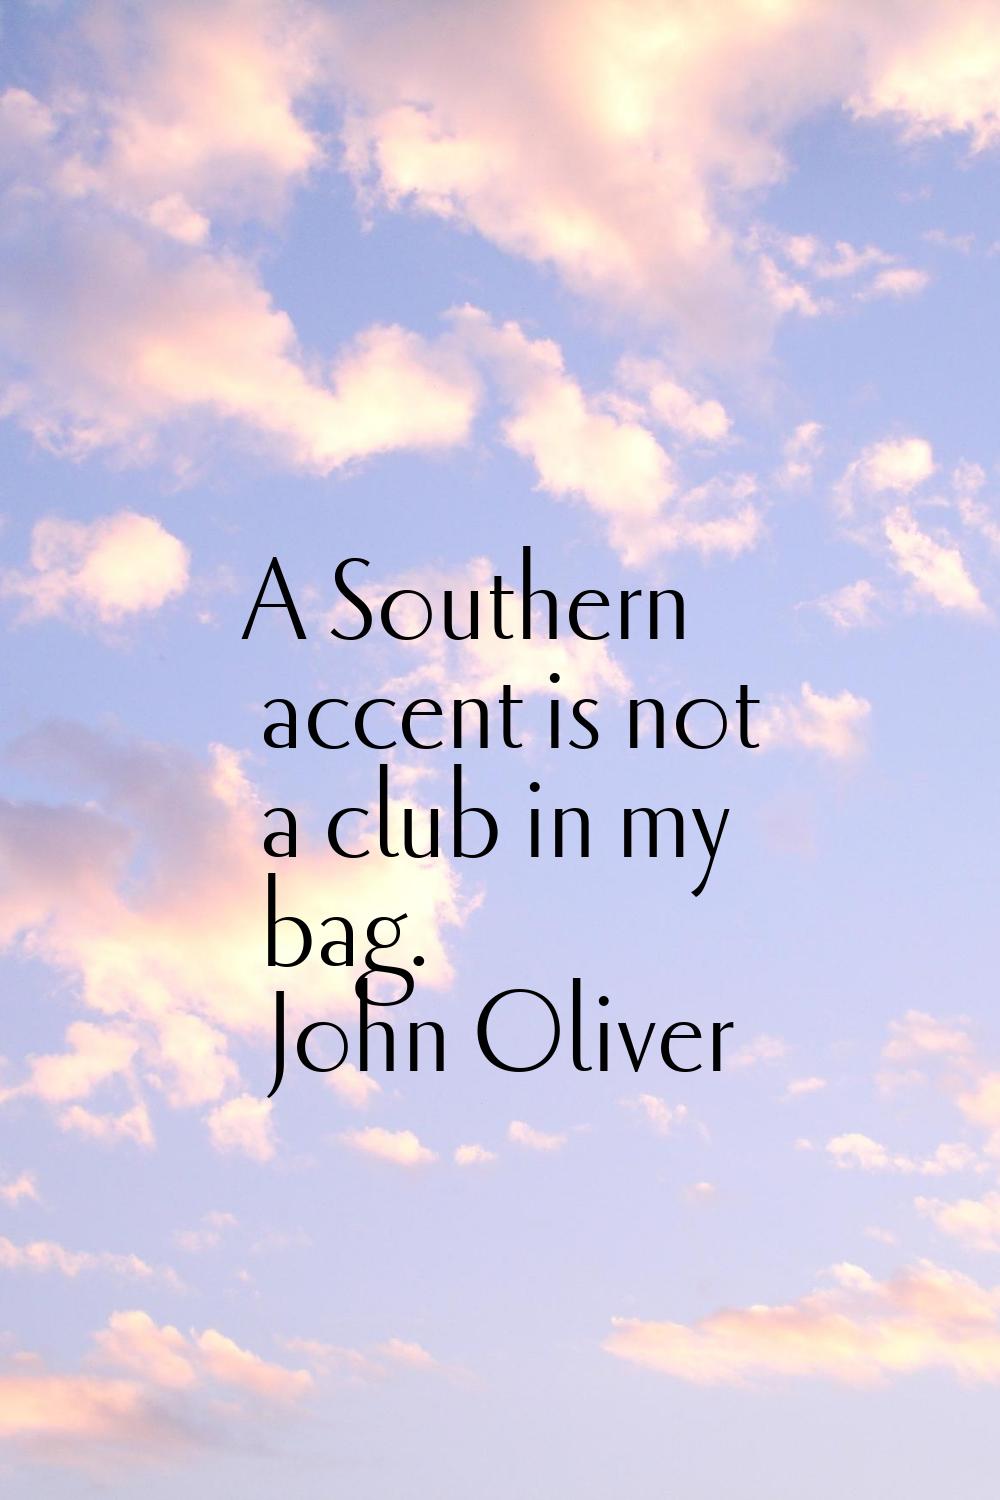 A Southern accent is not a club in my bag.